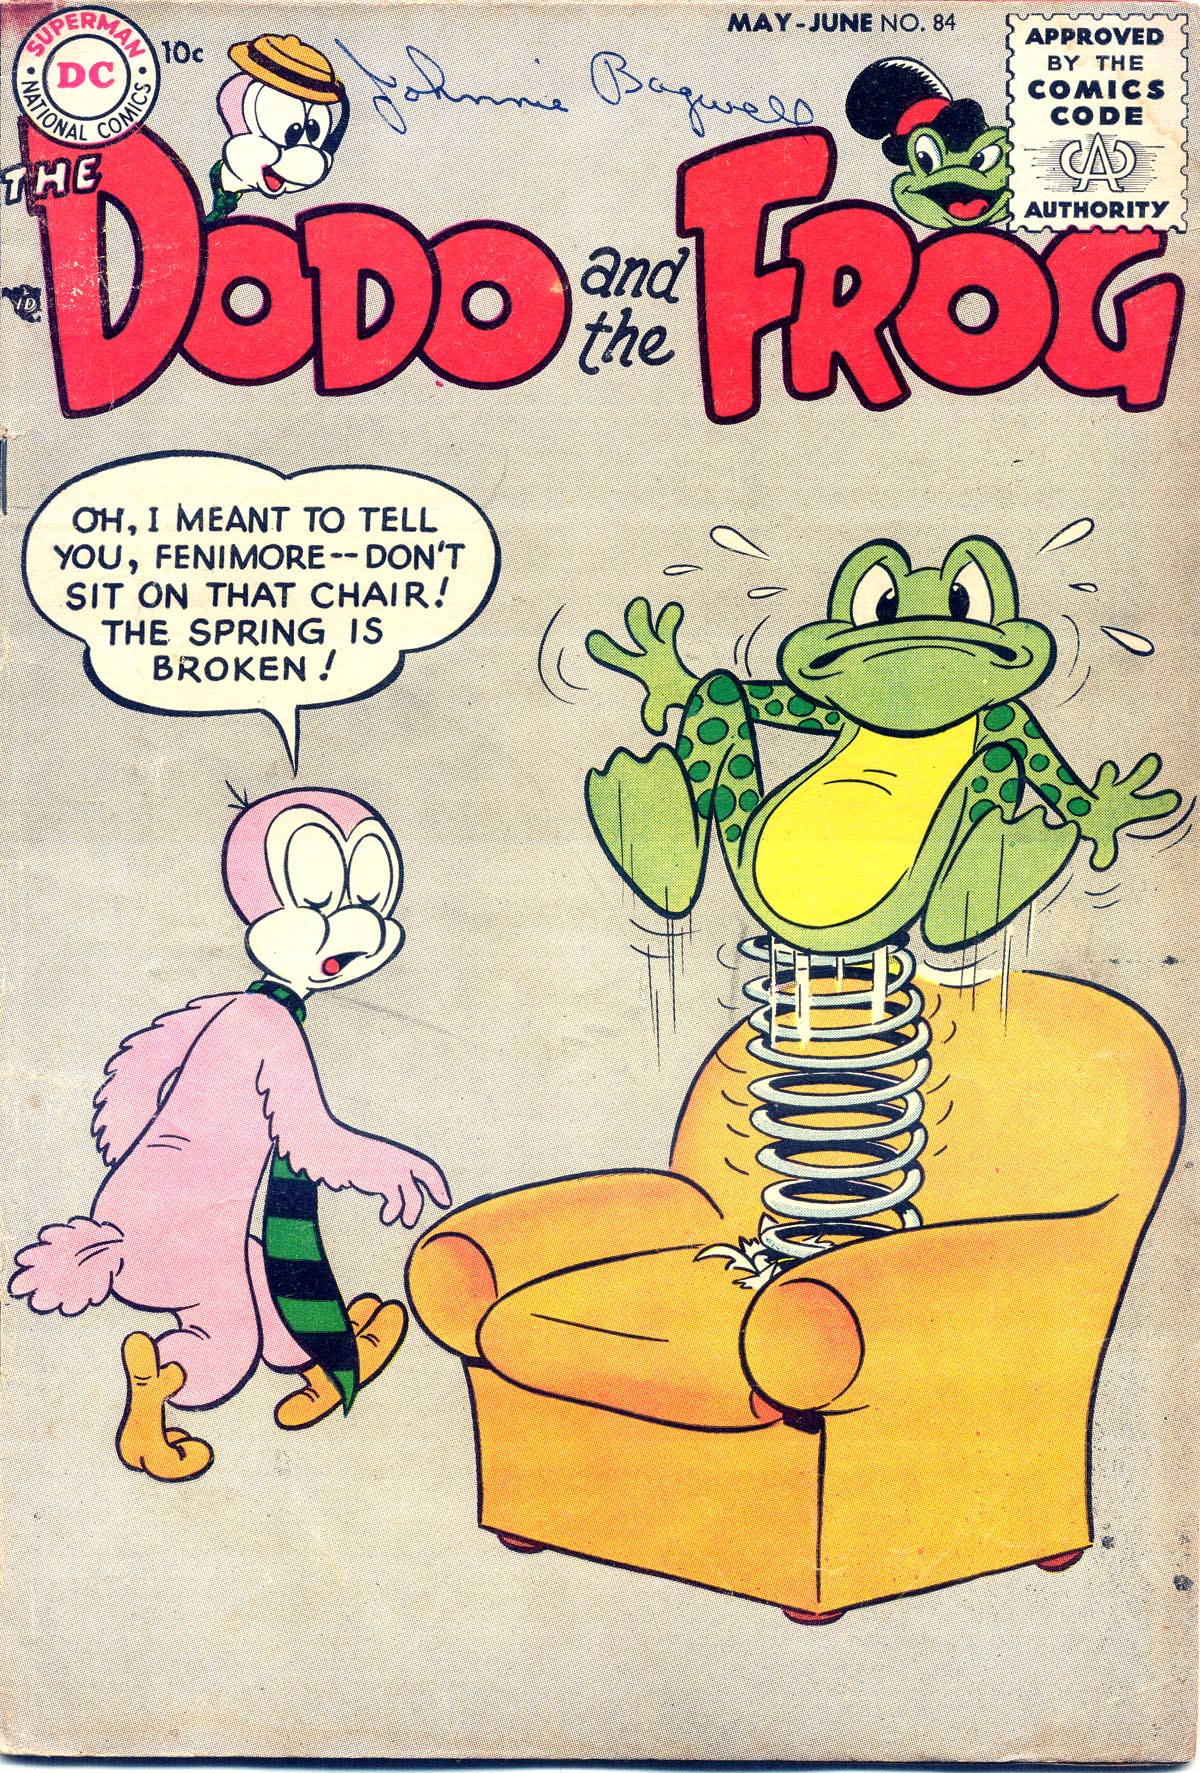 Read online Dodo and The Frog comic -  Issue #84 - 1